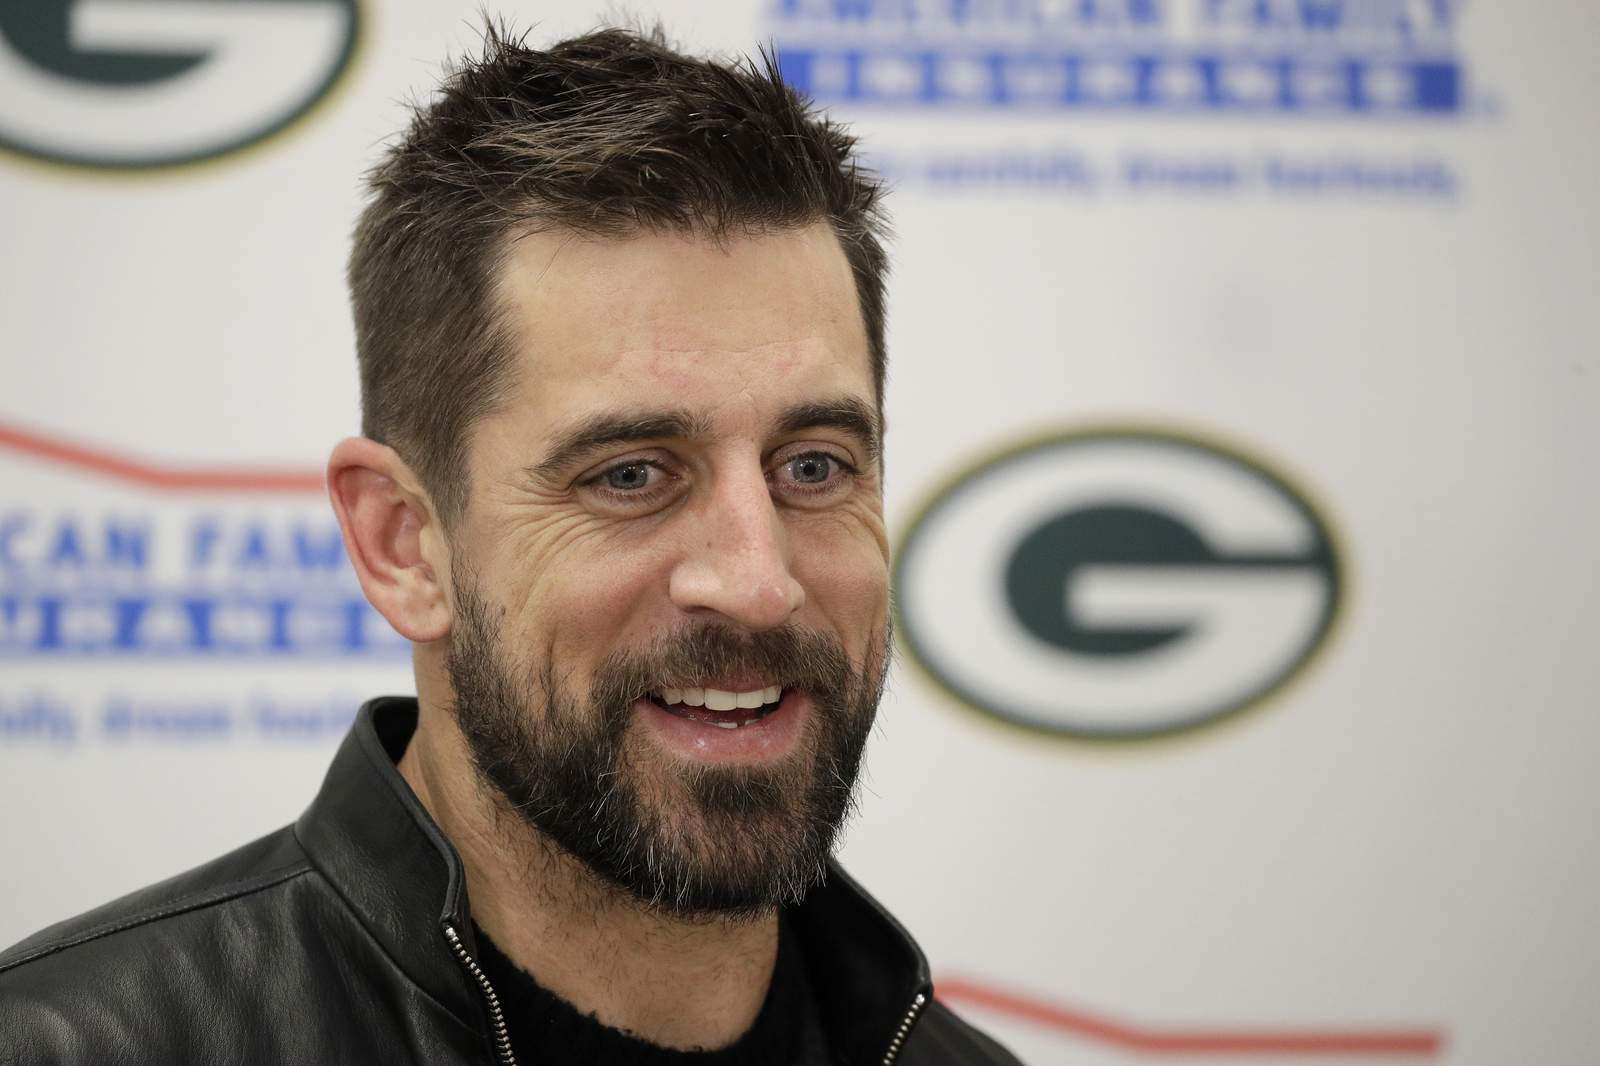 Rodgers says Packers' decision to draft Love surprised him